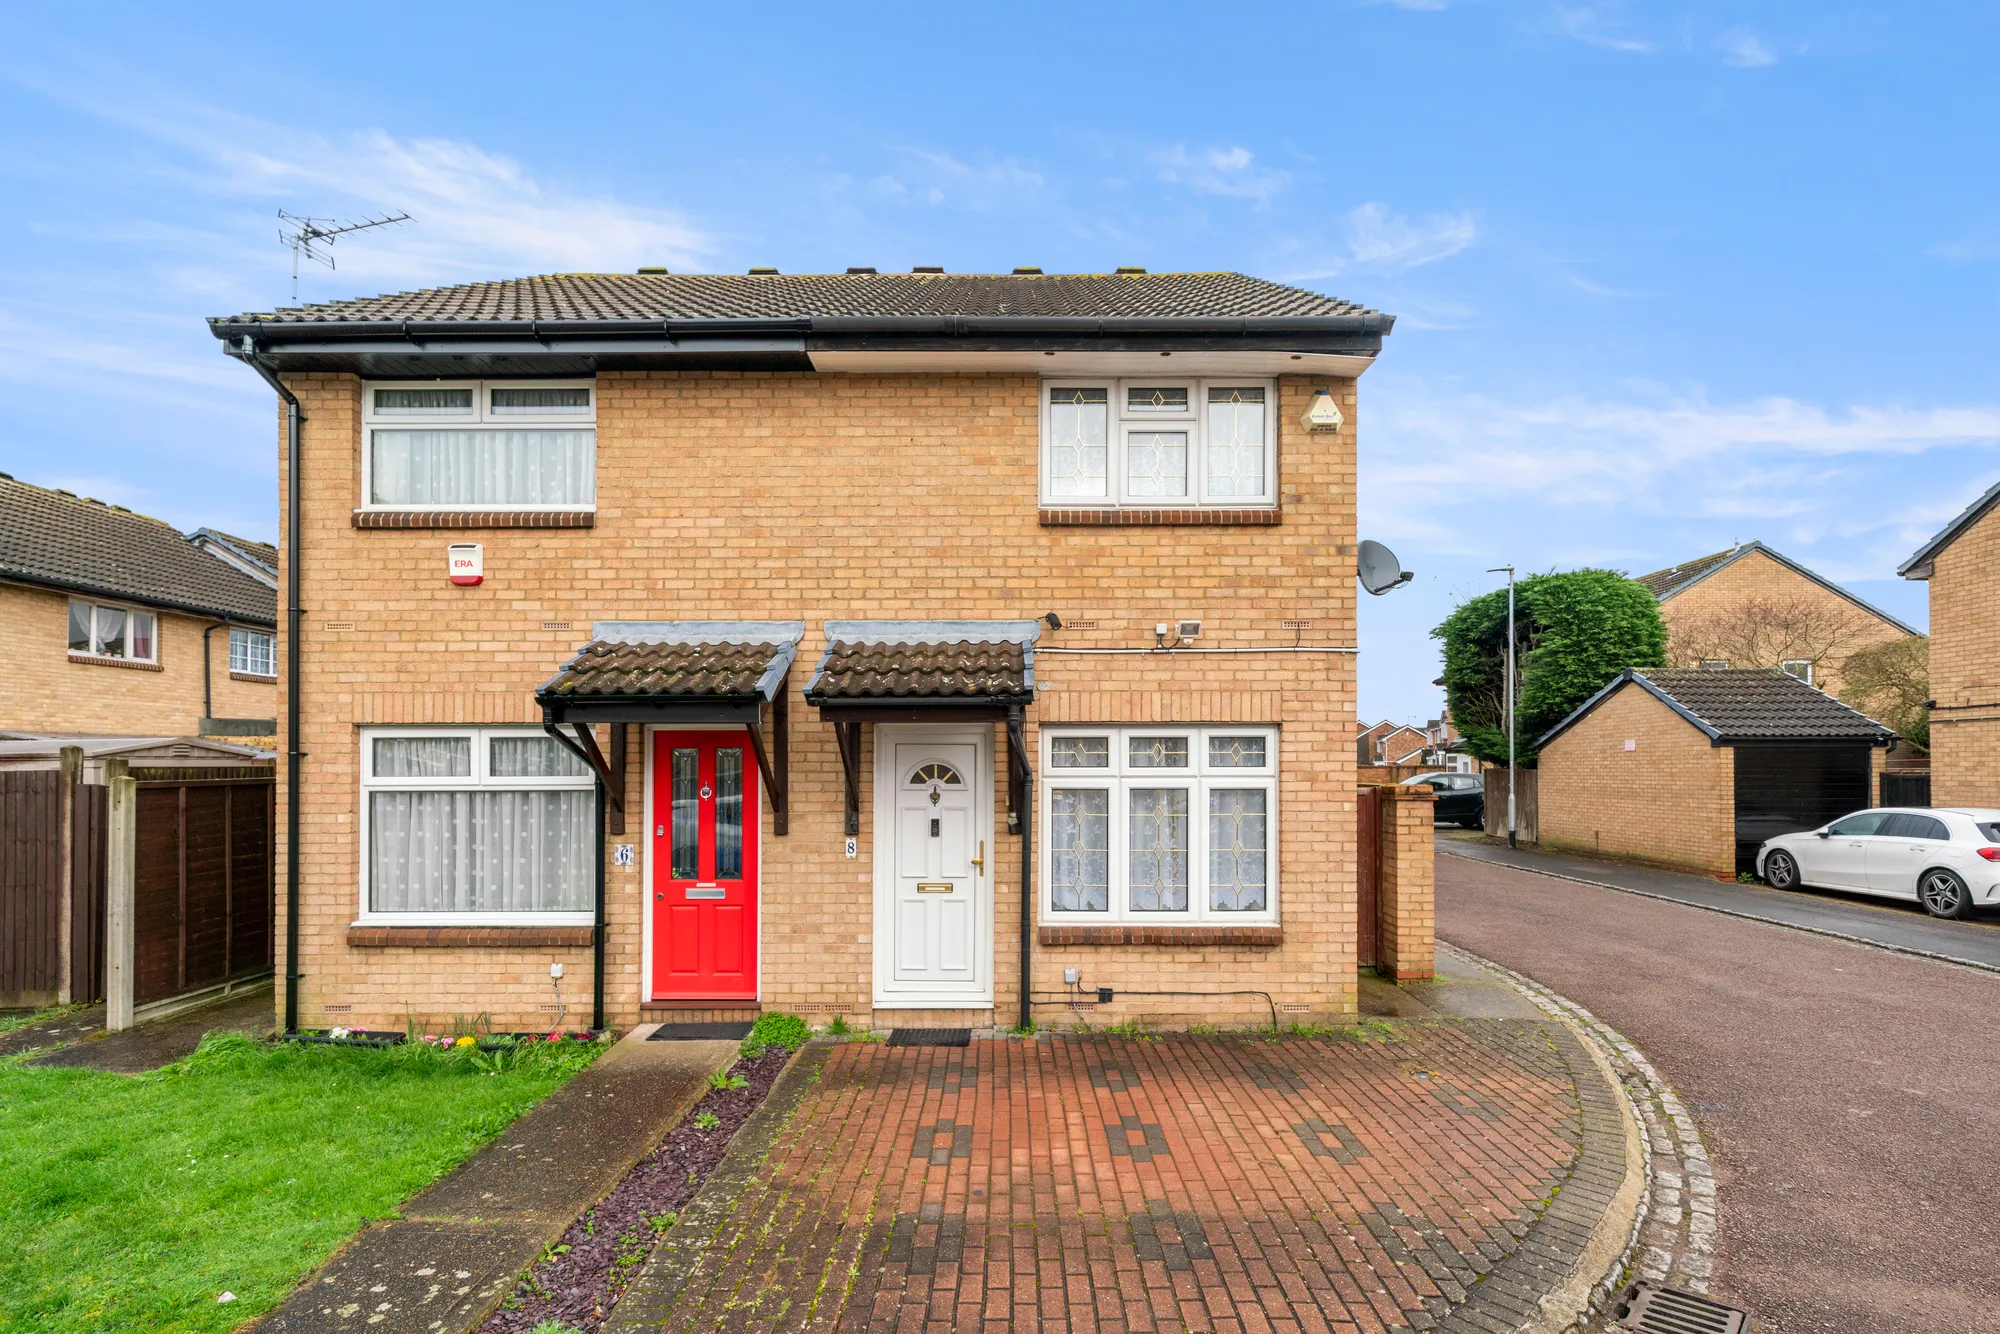 2 bed semi-detached house for sale in Alba Close, Hayes - Property Image 1